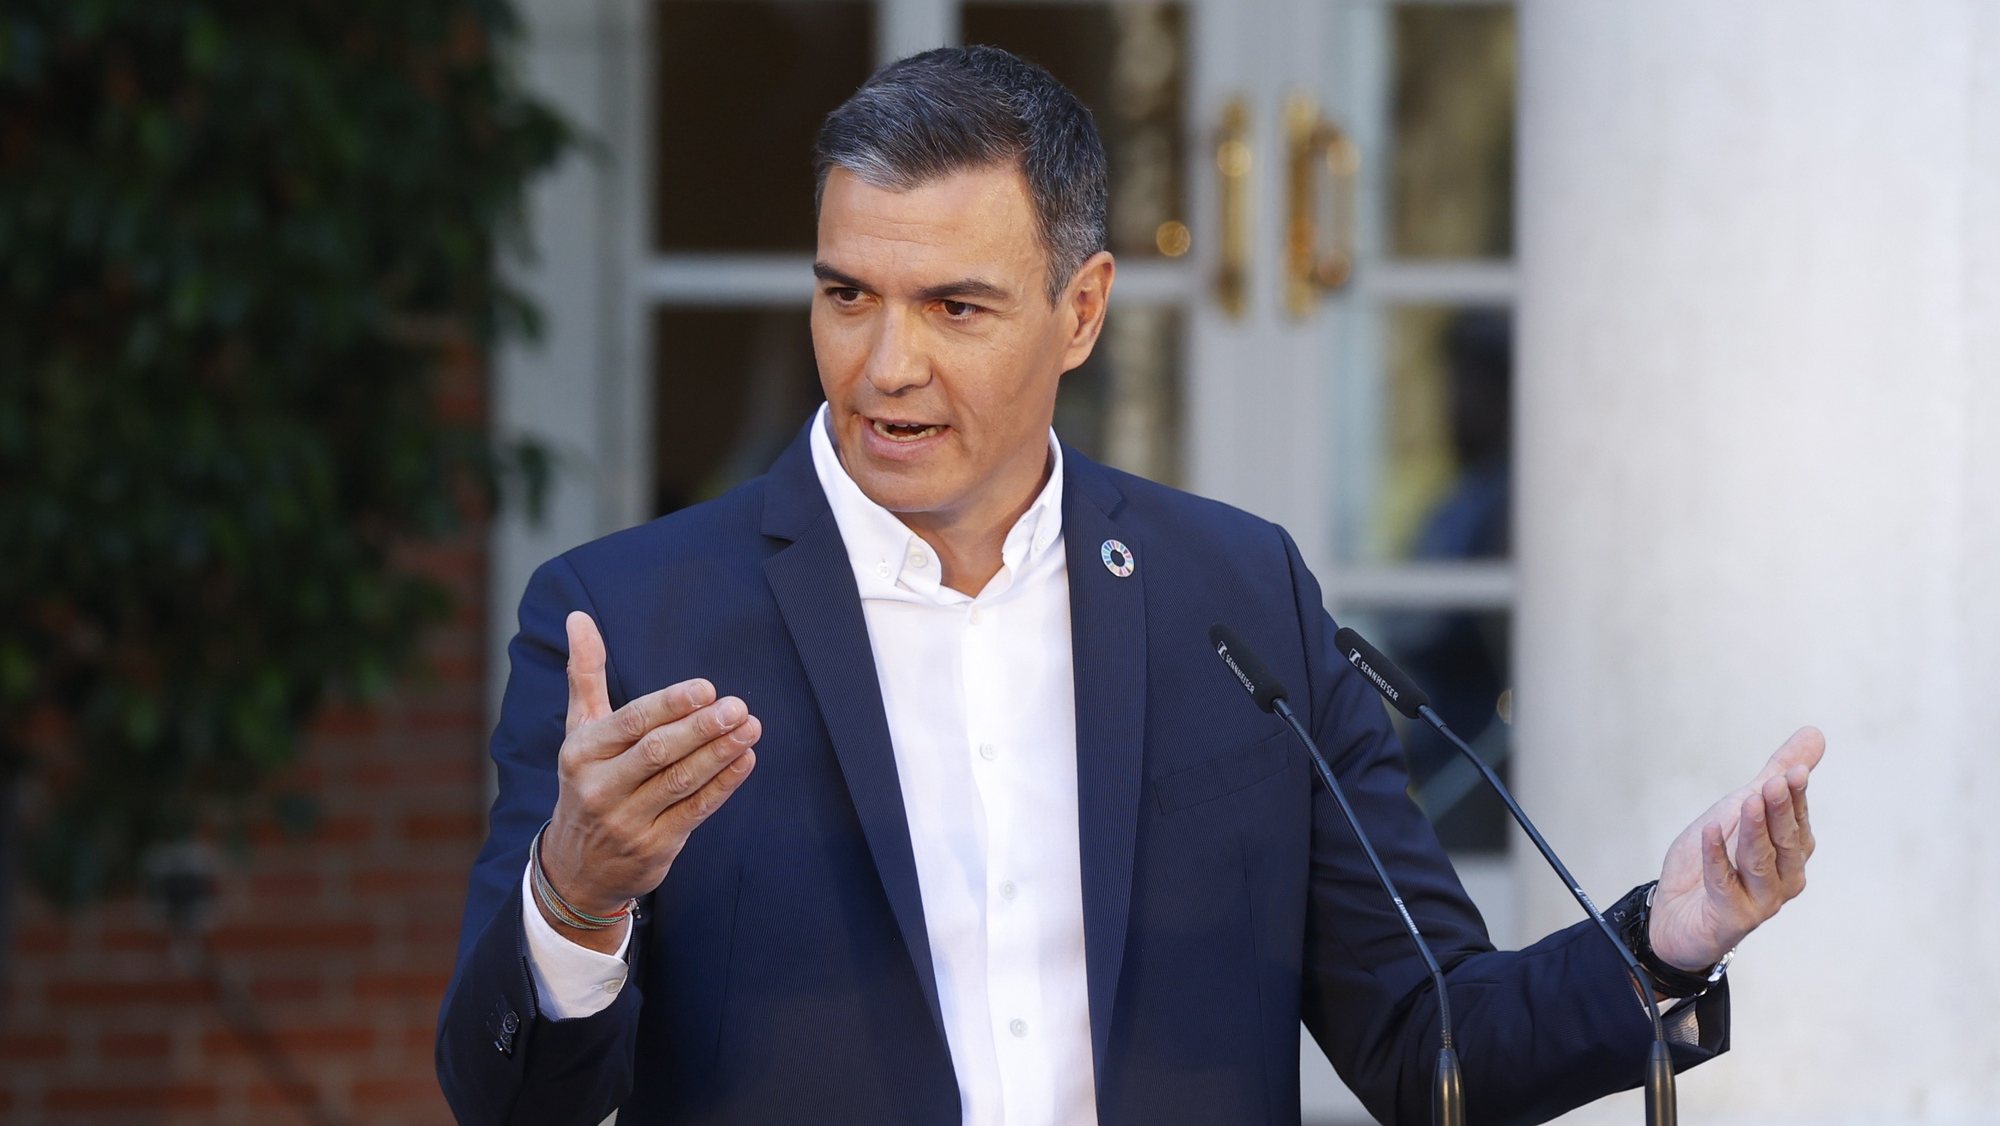 epa10160930 Spanish Prime Minister Pedro Sanchez gestures while speaking during an open  question round with citizens at Moncloa Palace in Madrid, Spain, 05 September 2022.  EPA/JUAN CARLOS HIDALGO